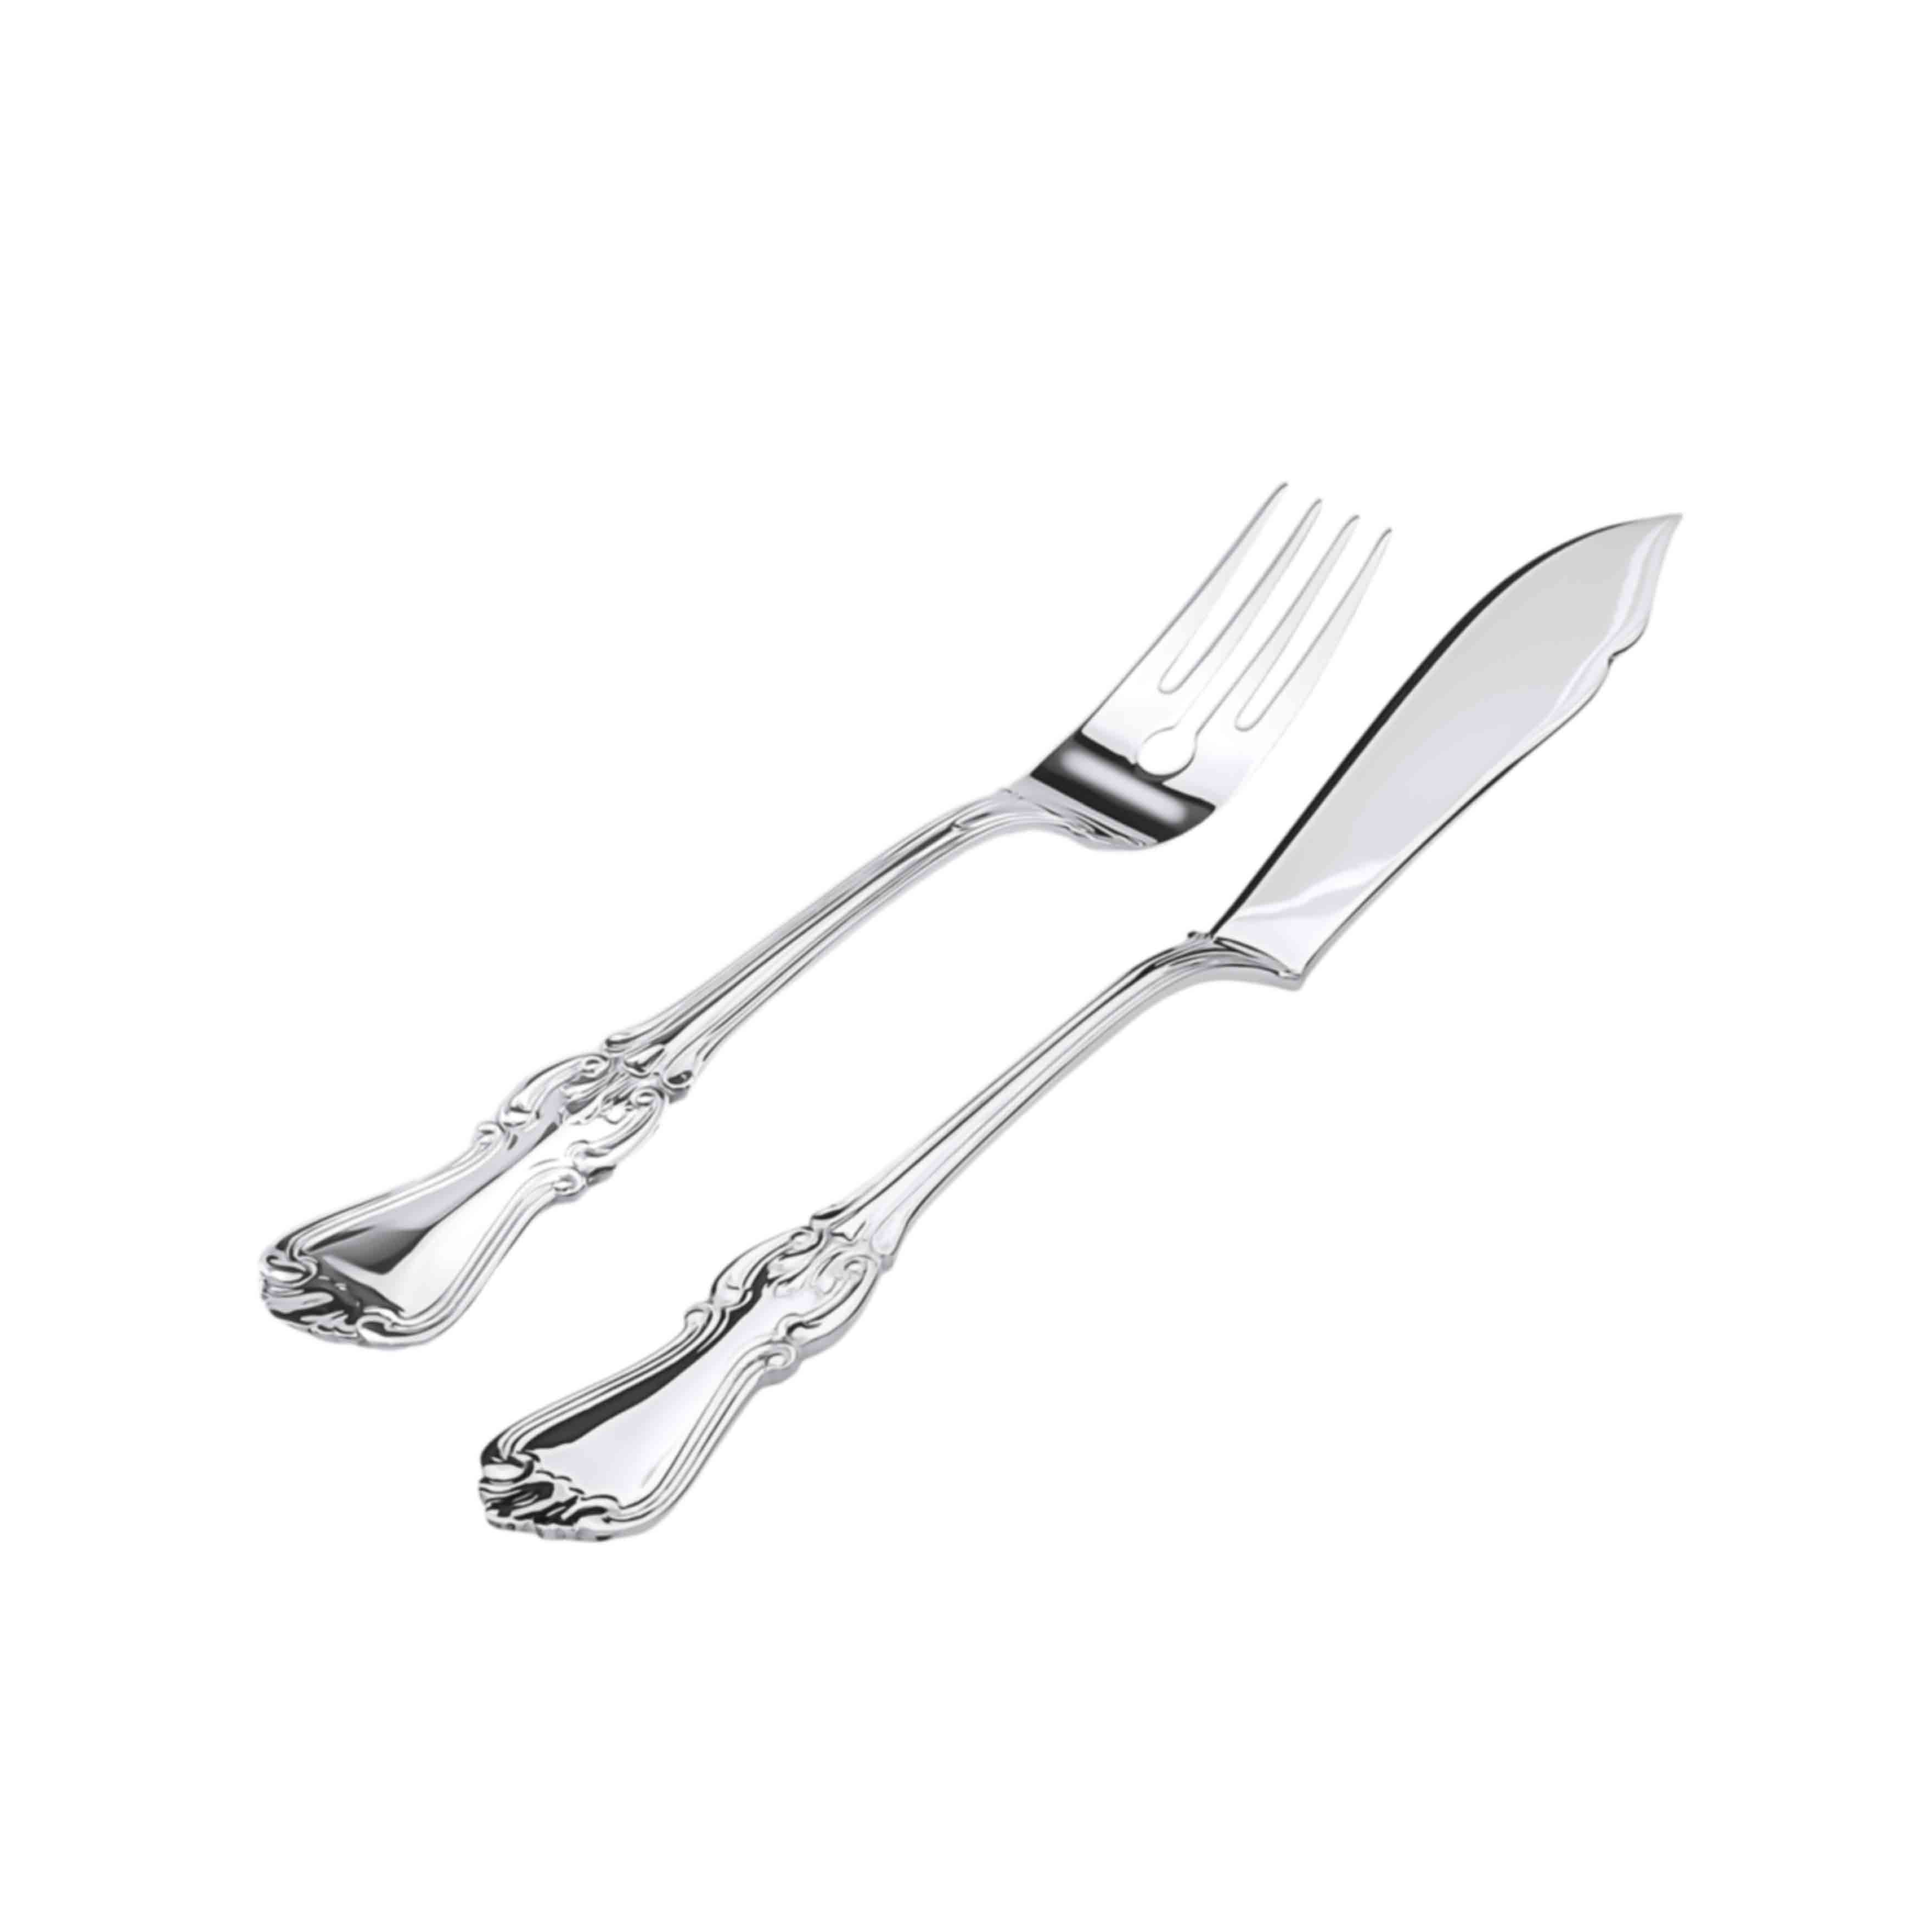 Silver Flatware - European Series. Hypoallergenic Antimicrobial 830/999  Silver. French Style Silver Fish Fork and Knife